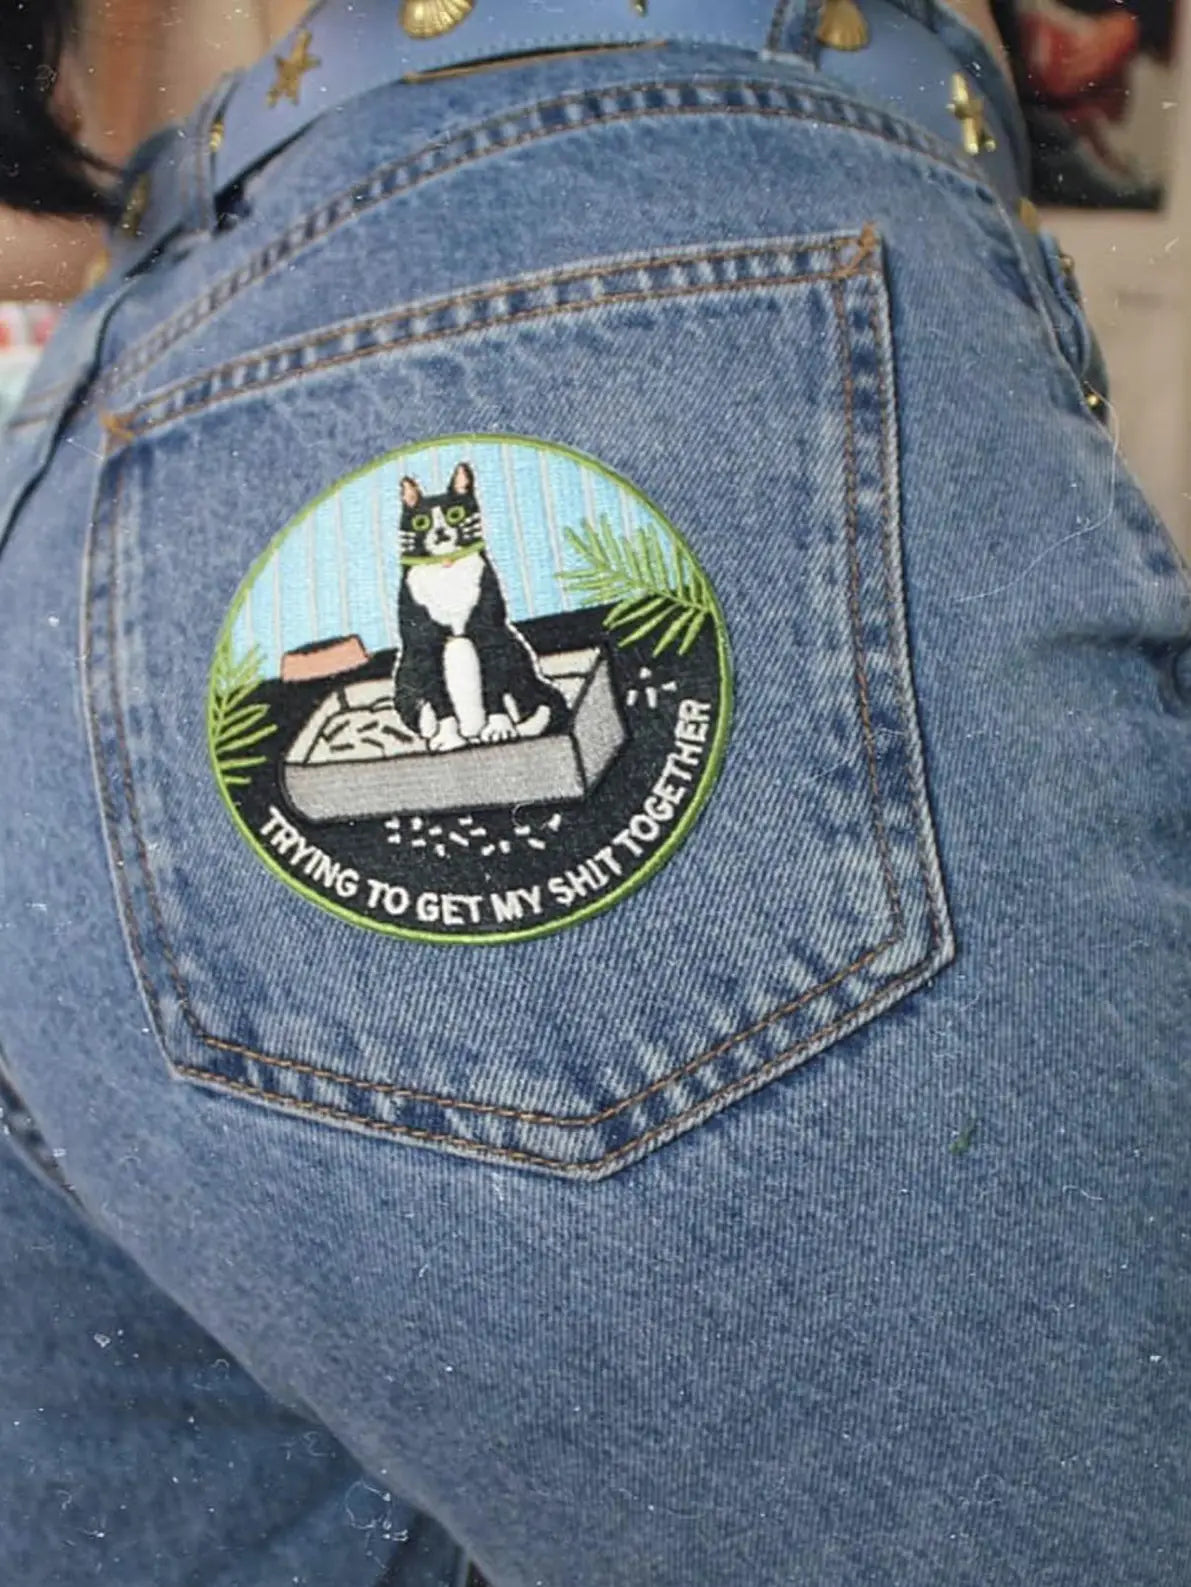 Trying To Get My Shit Together Patch